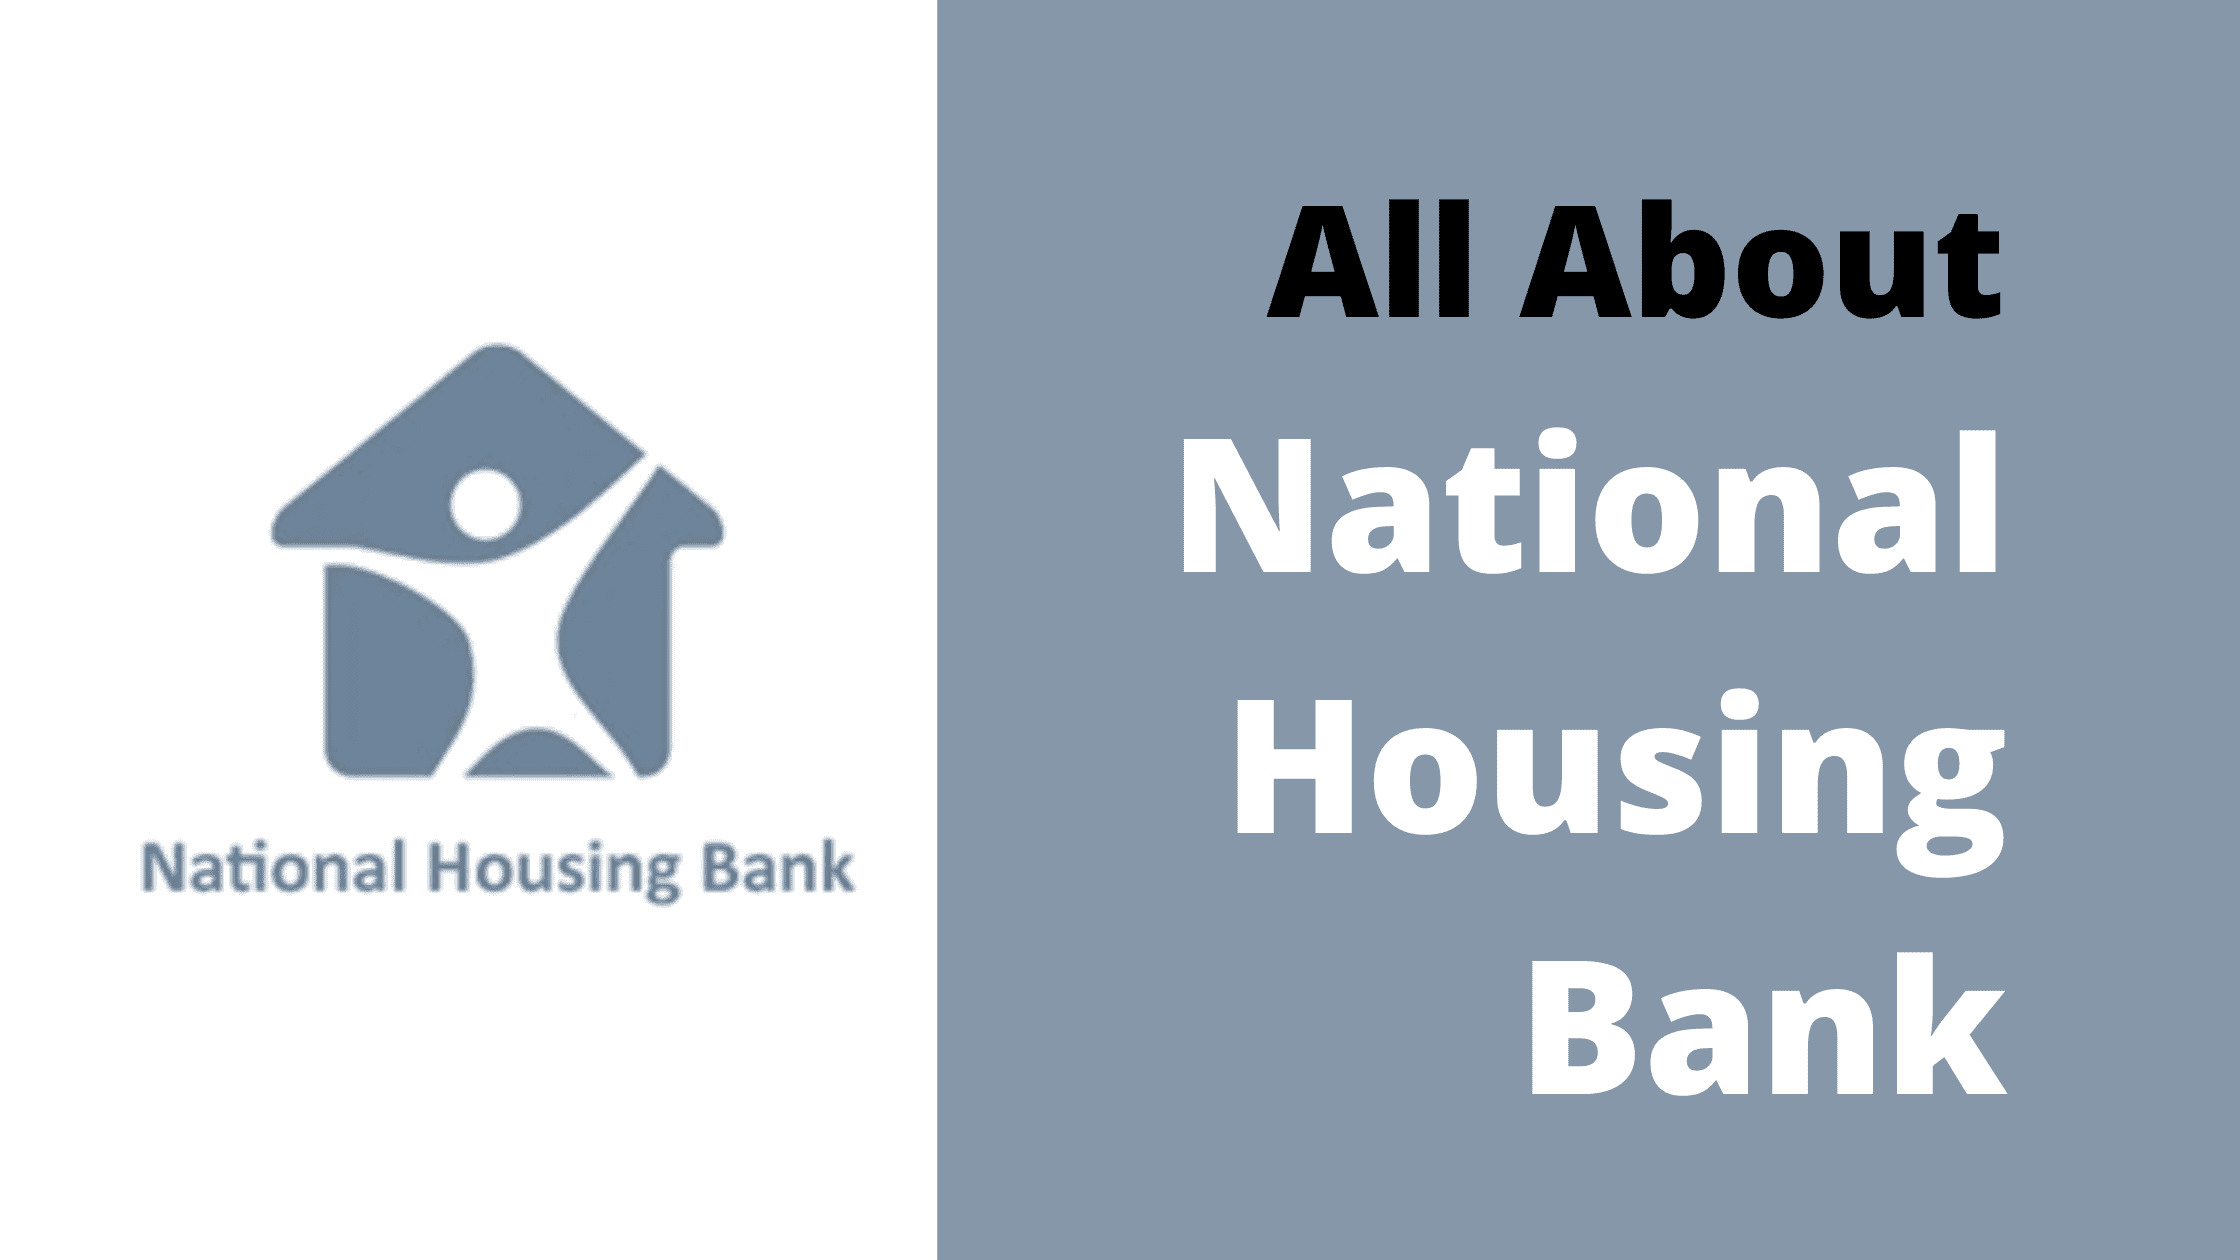 All About National Housing Bank (NHB)